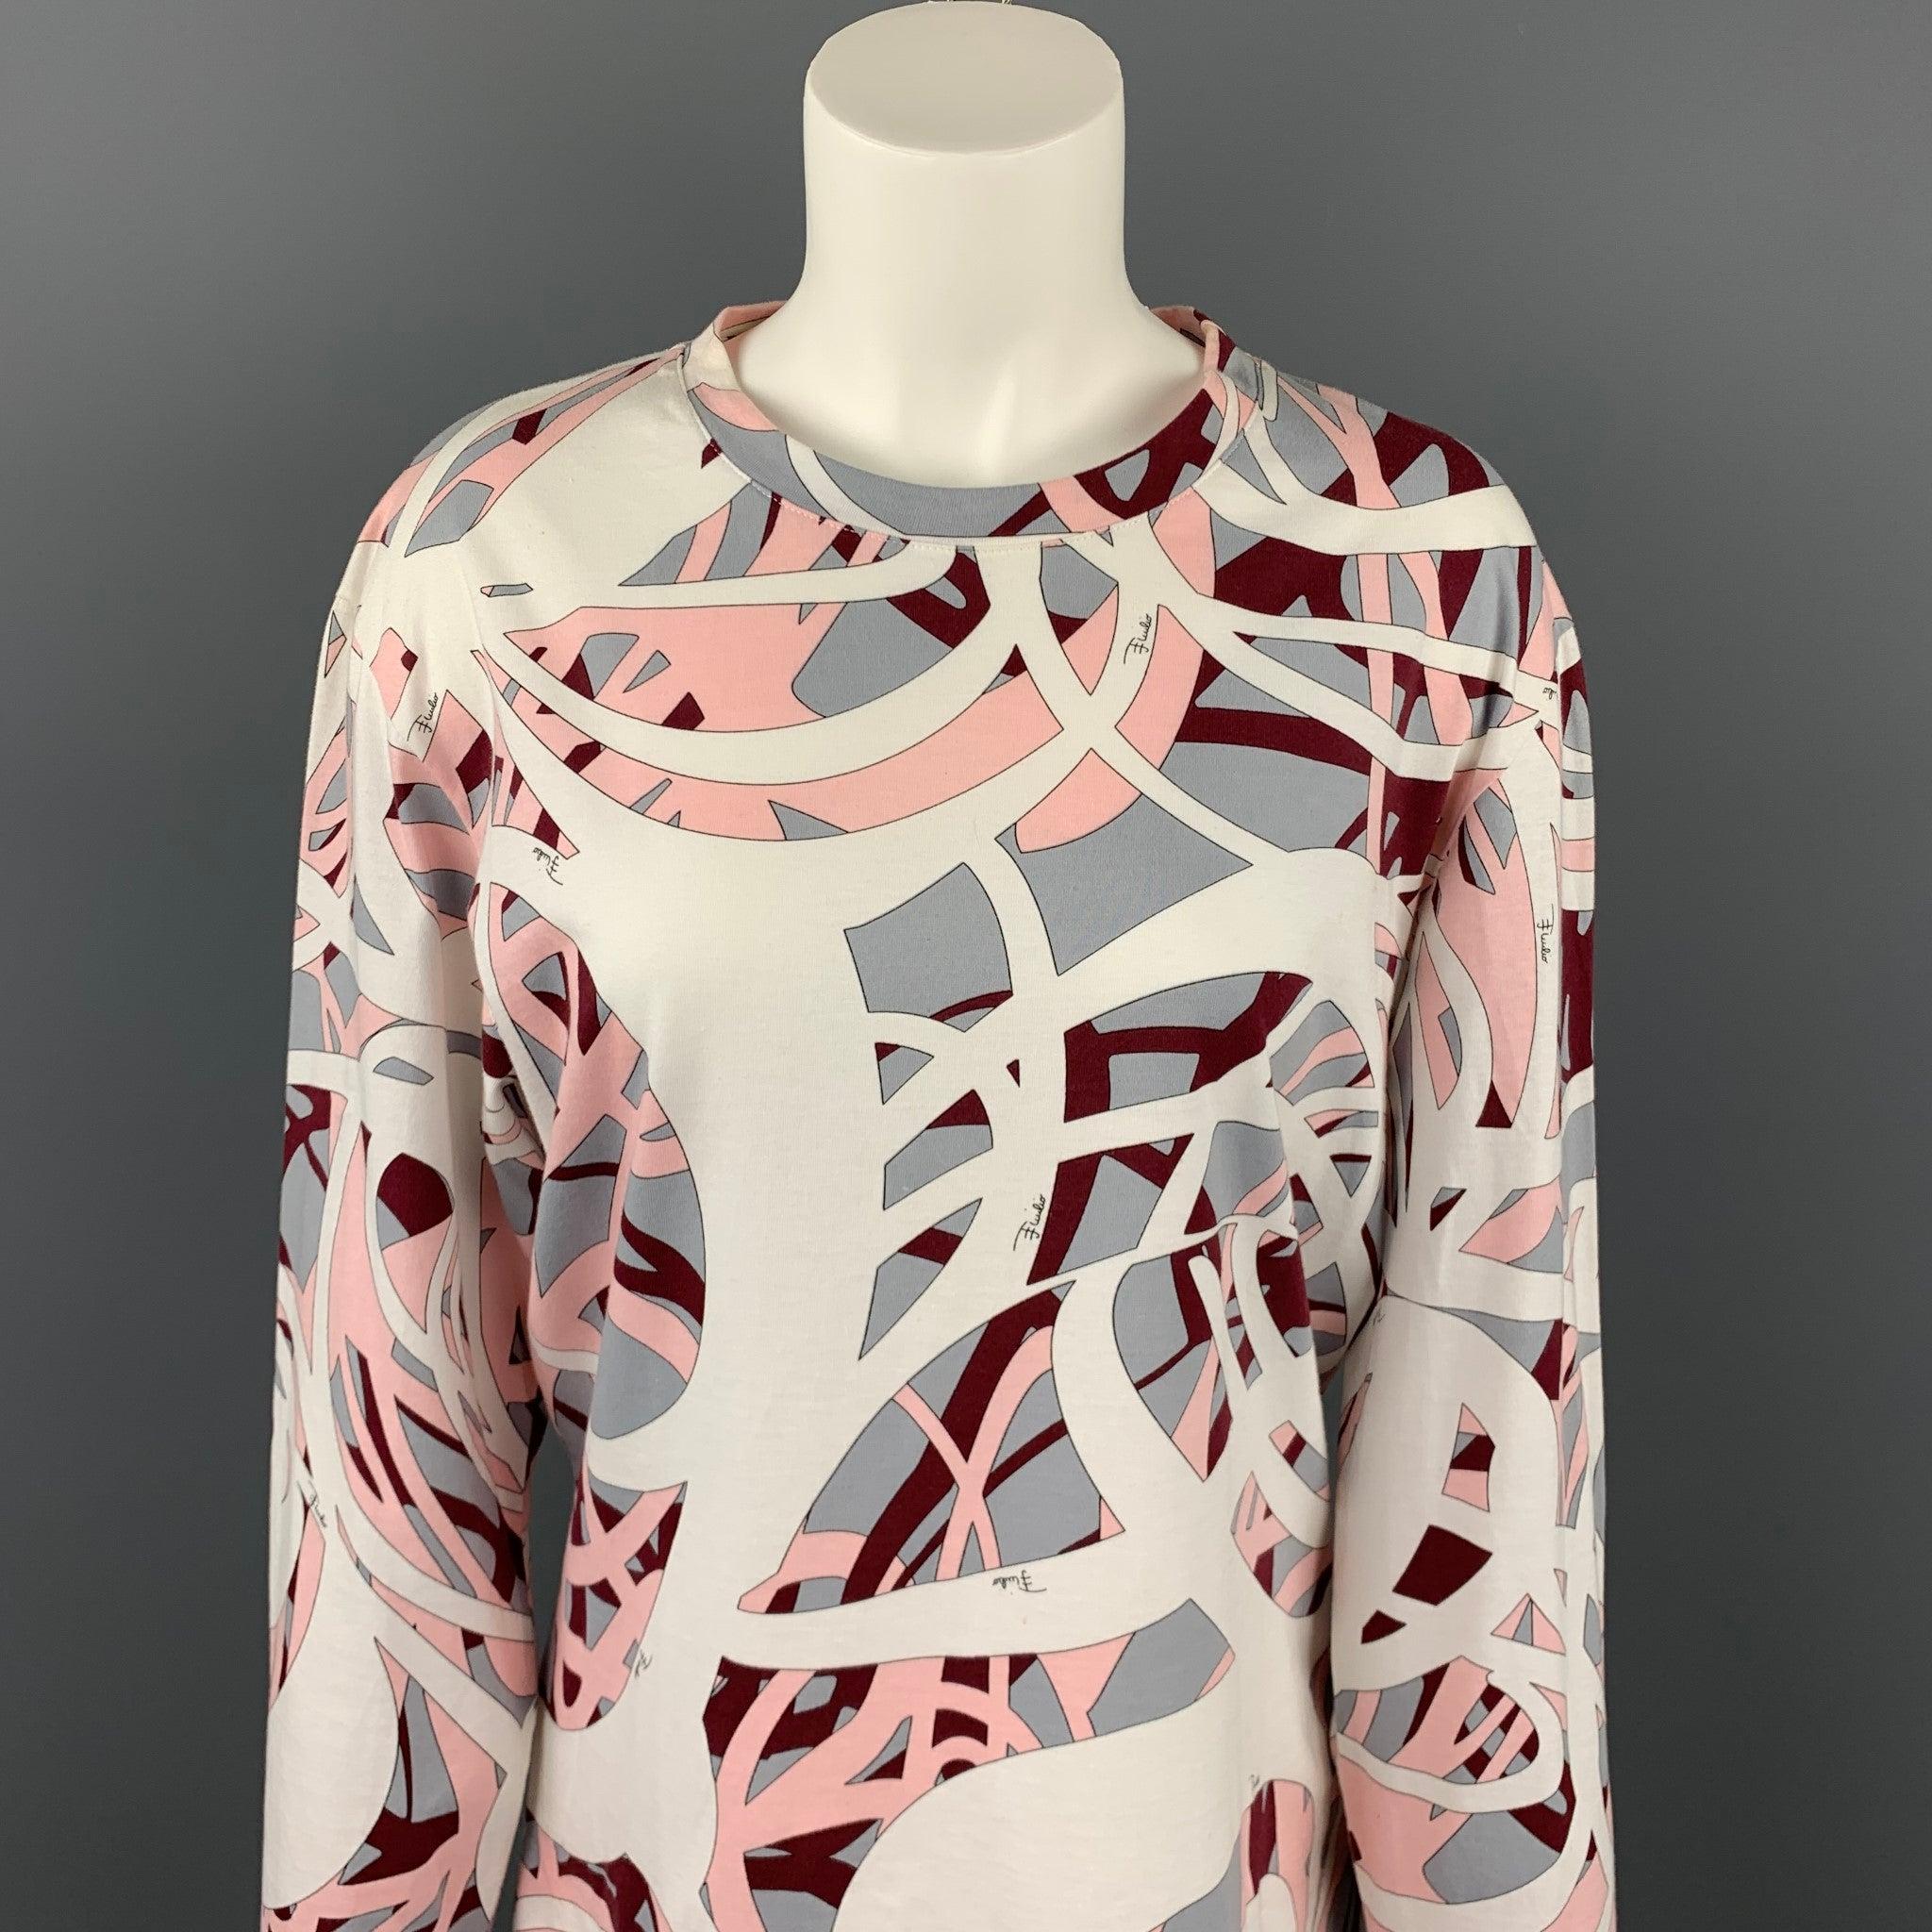 EMILIO PUCCI long sleeve t-shirt comes in a multi-color print cotton featuring a crew-neck. Moderate discoloration. Made in Italy.Good
Pre-Owned Condition. 

Marked:   L 

Measurements: 
 
Shoulder: 19 inches 
Bust: 42 inches 
Sleeve: 26.5 inches